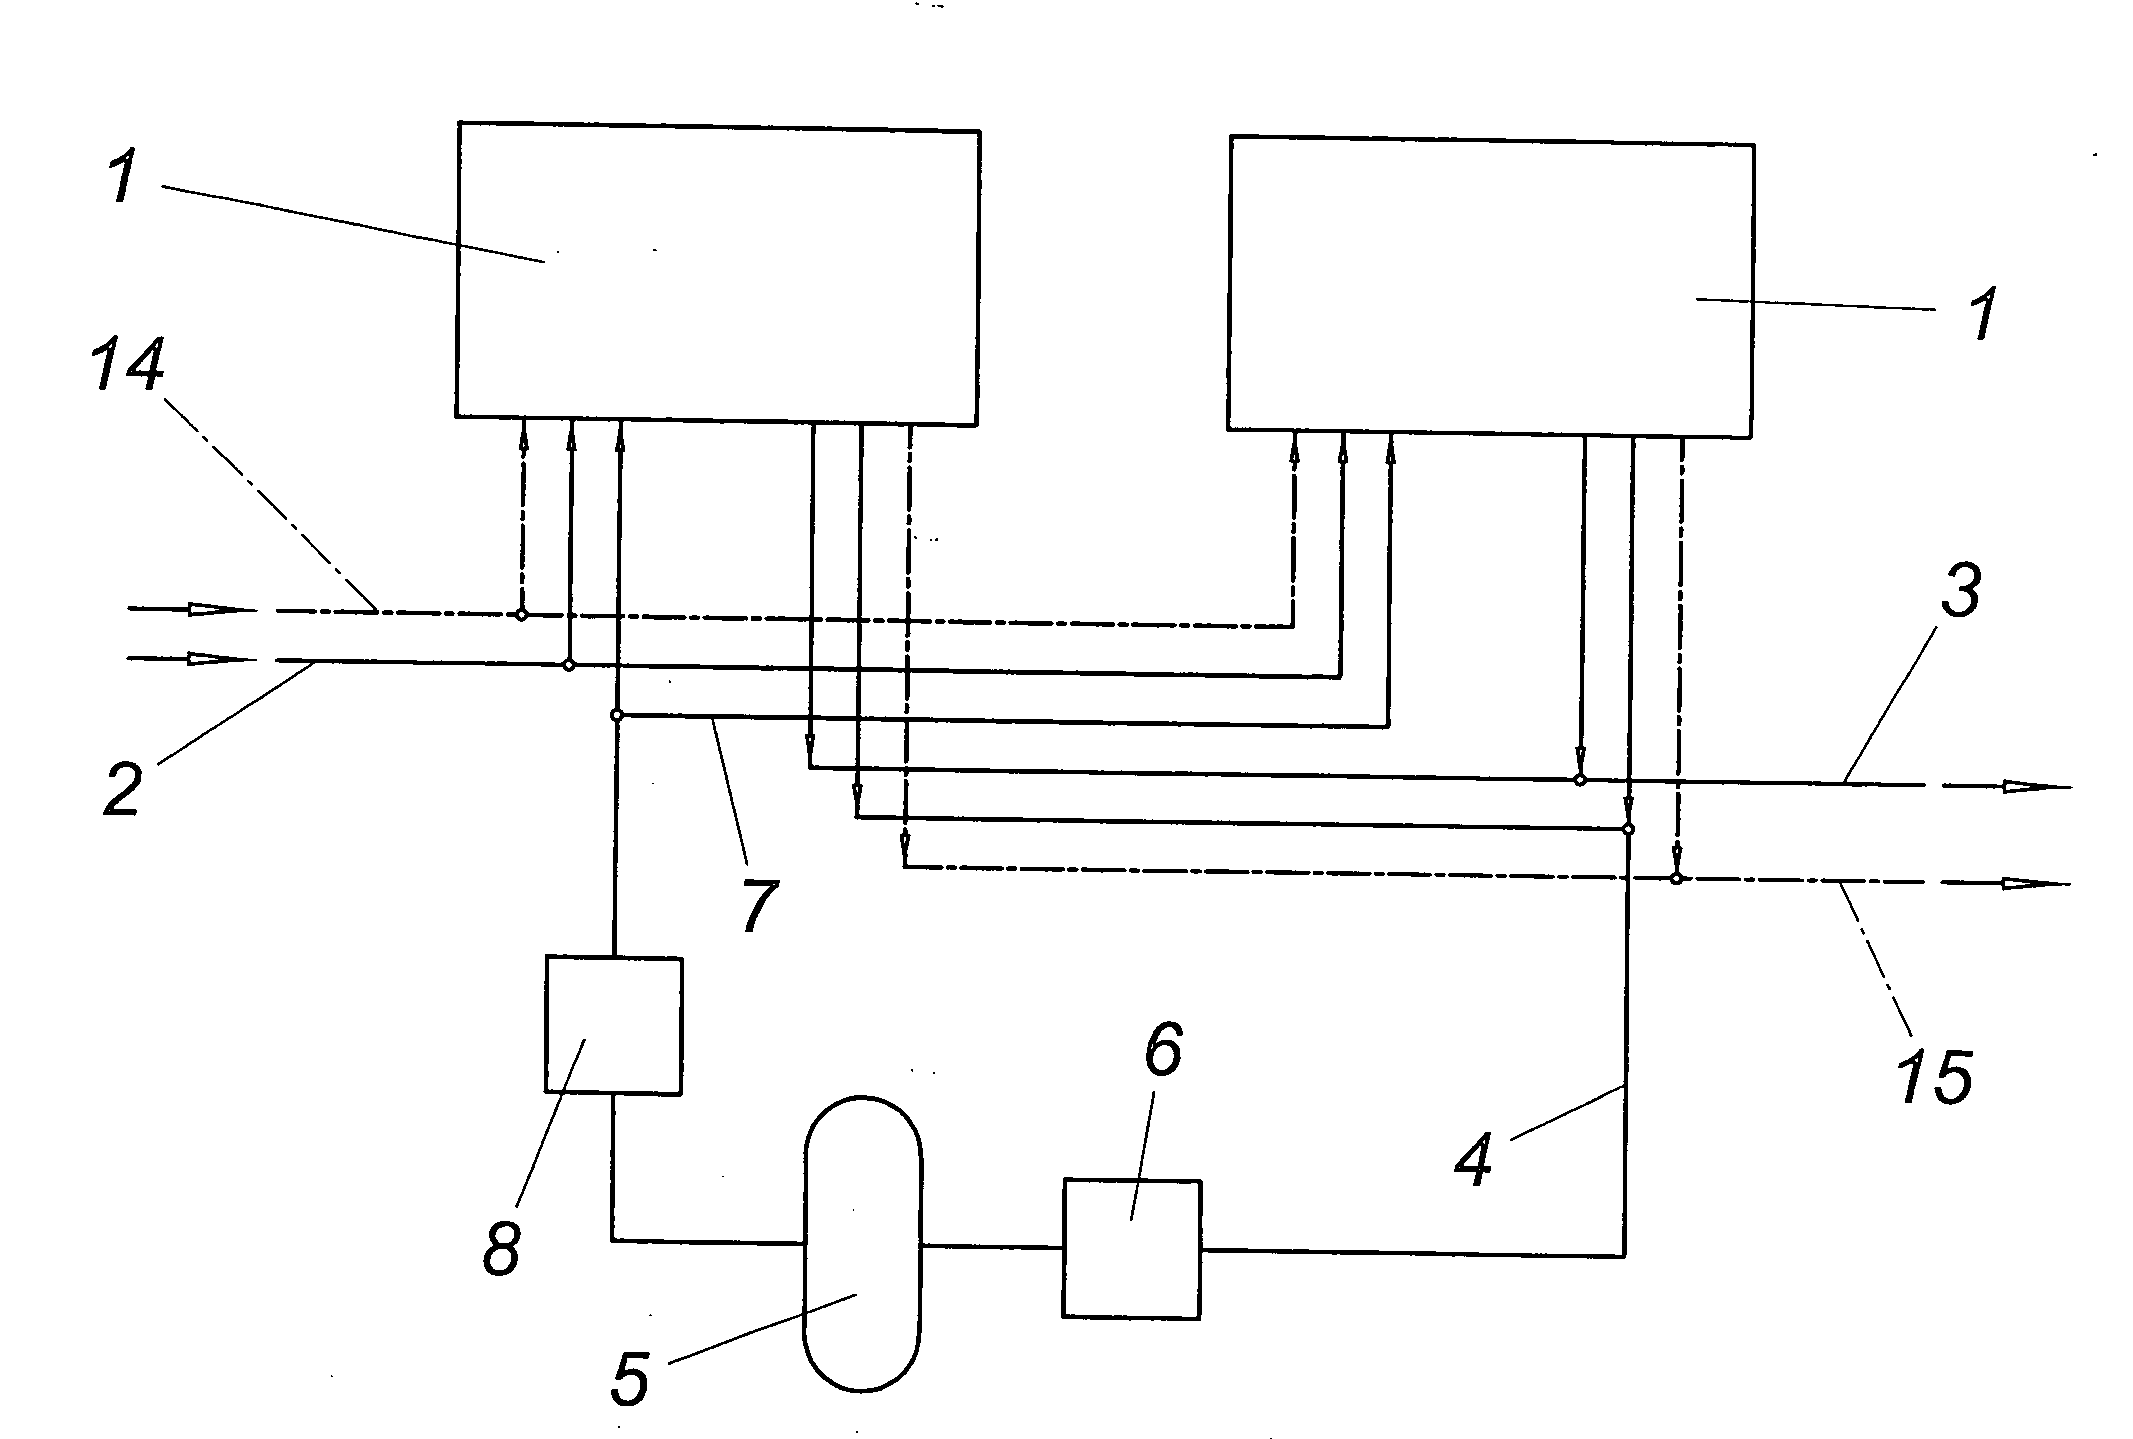 Method for batchwise heat treatment of goods to be annealed